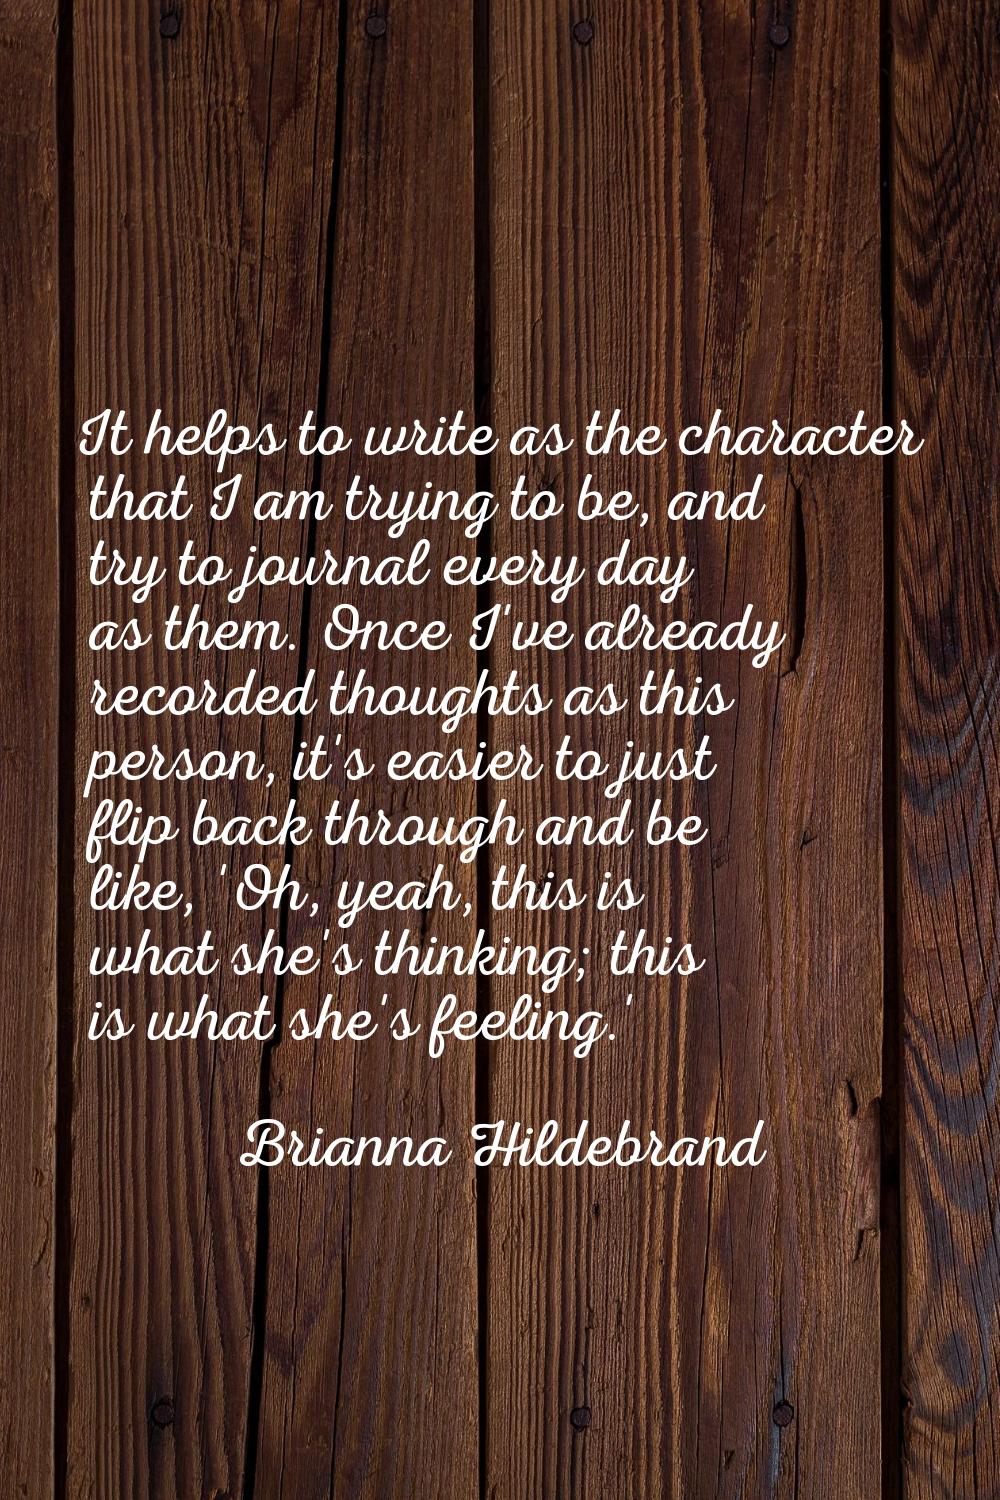 It helps to write as the character that I am trying to be, and try to journal every day as them. On